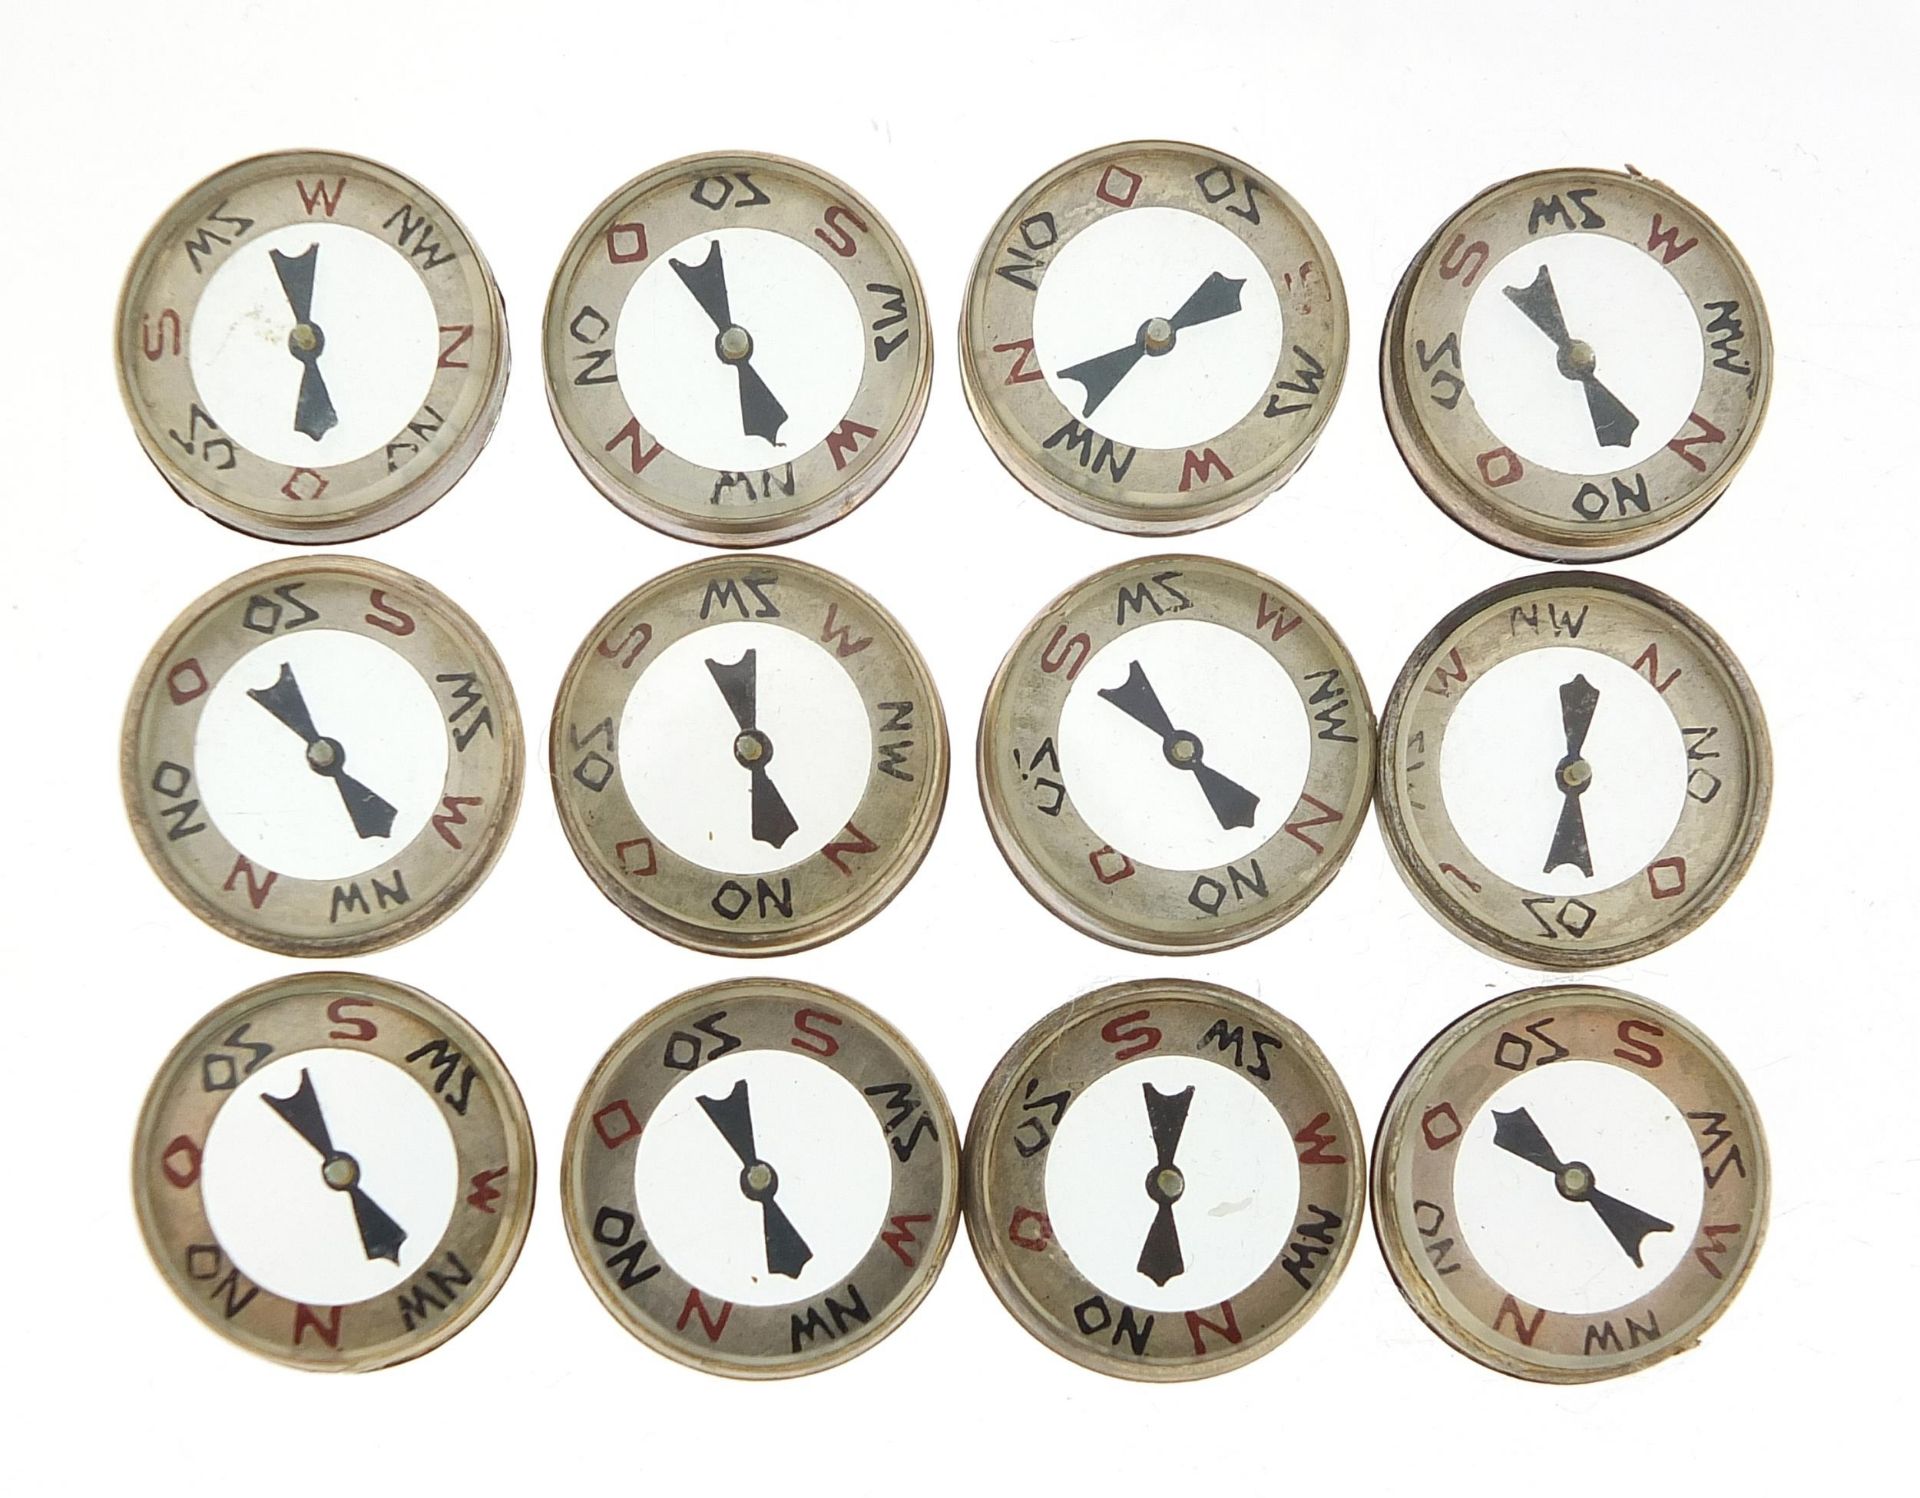 Twelve German military interest Luftwaffe emergency compasses with box - Image 3 of 3